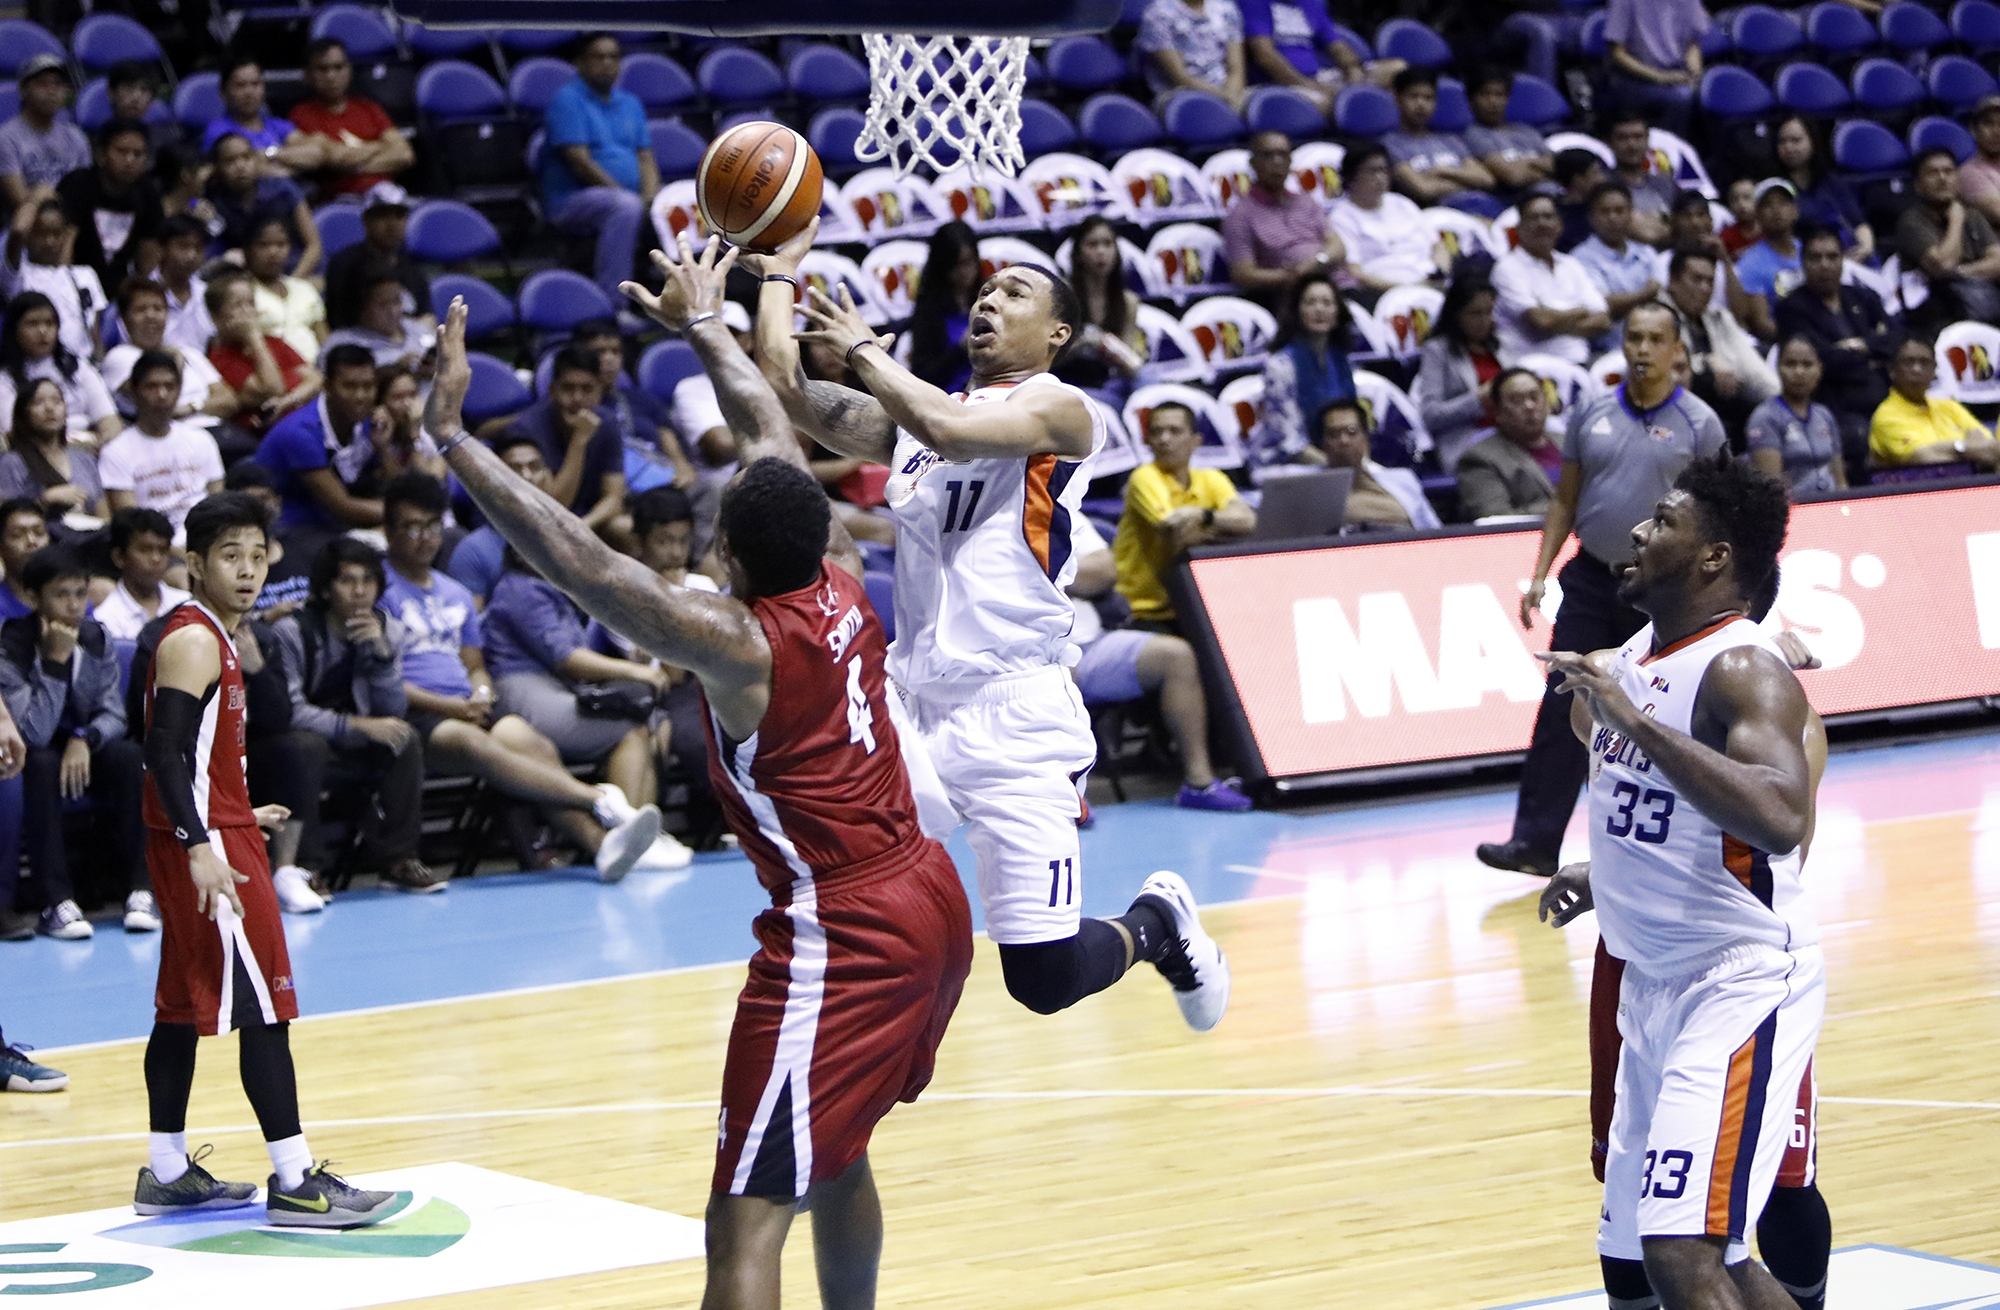 Meralco’s Chris Newsome drives to the basket against Blackwater import Greg Smith in their PBA Commissioner’s Cup game yesterday at the Smart Araneta Coliseum.  PBA IMAGES